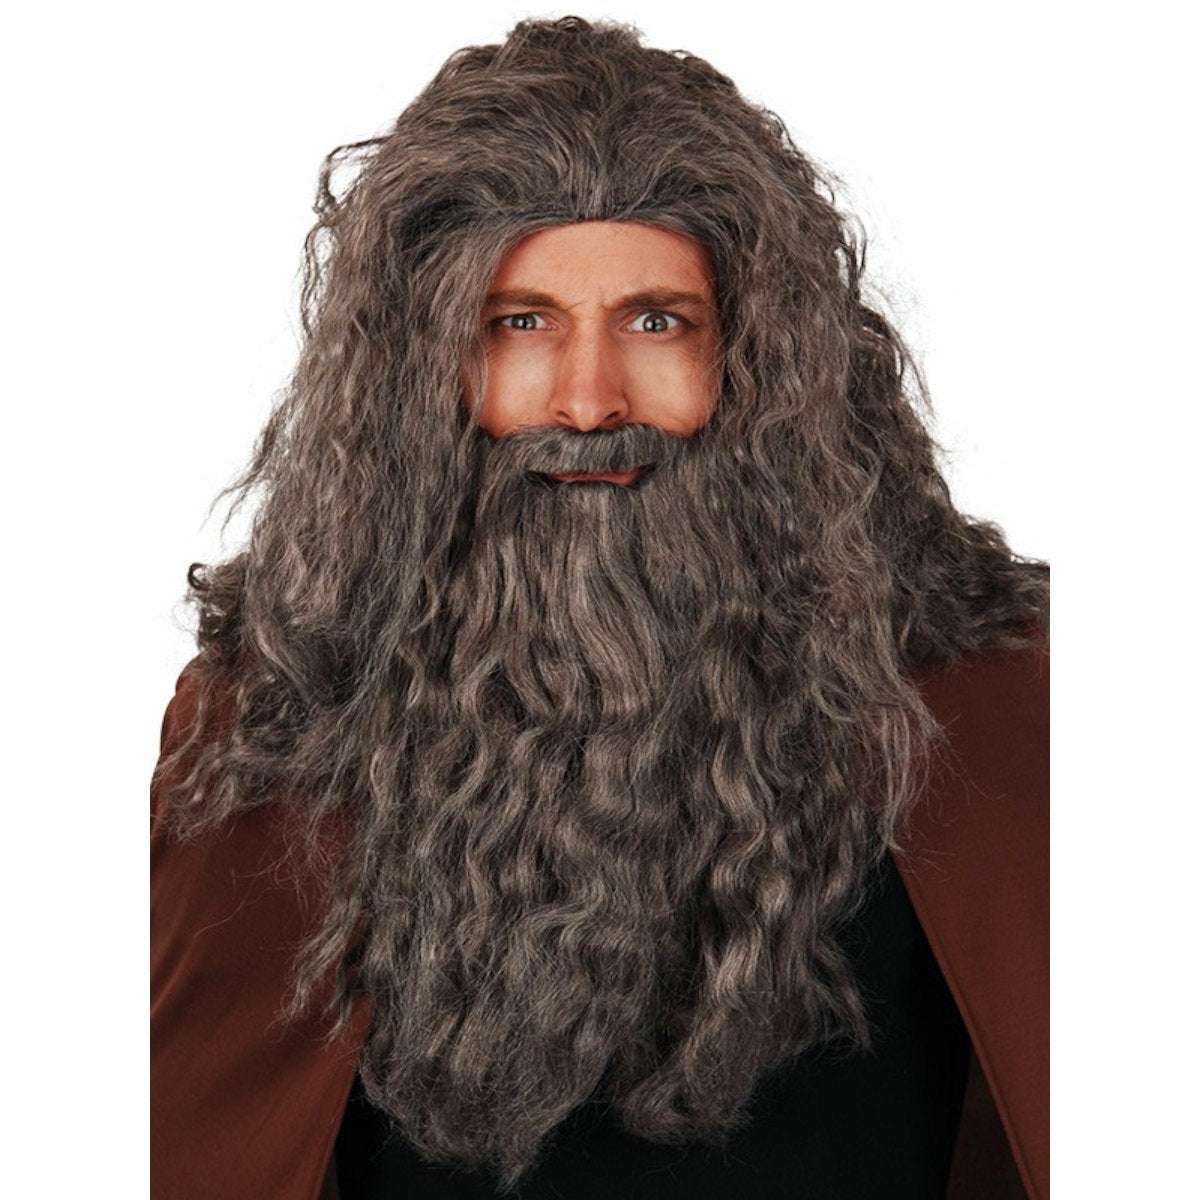 Wizard Wig with Beard and Moustache Fancy Dress Costume Wig